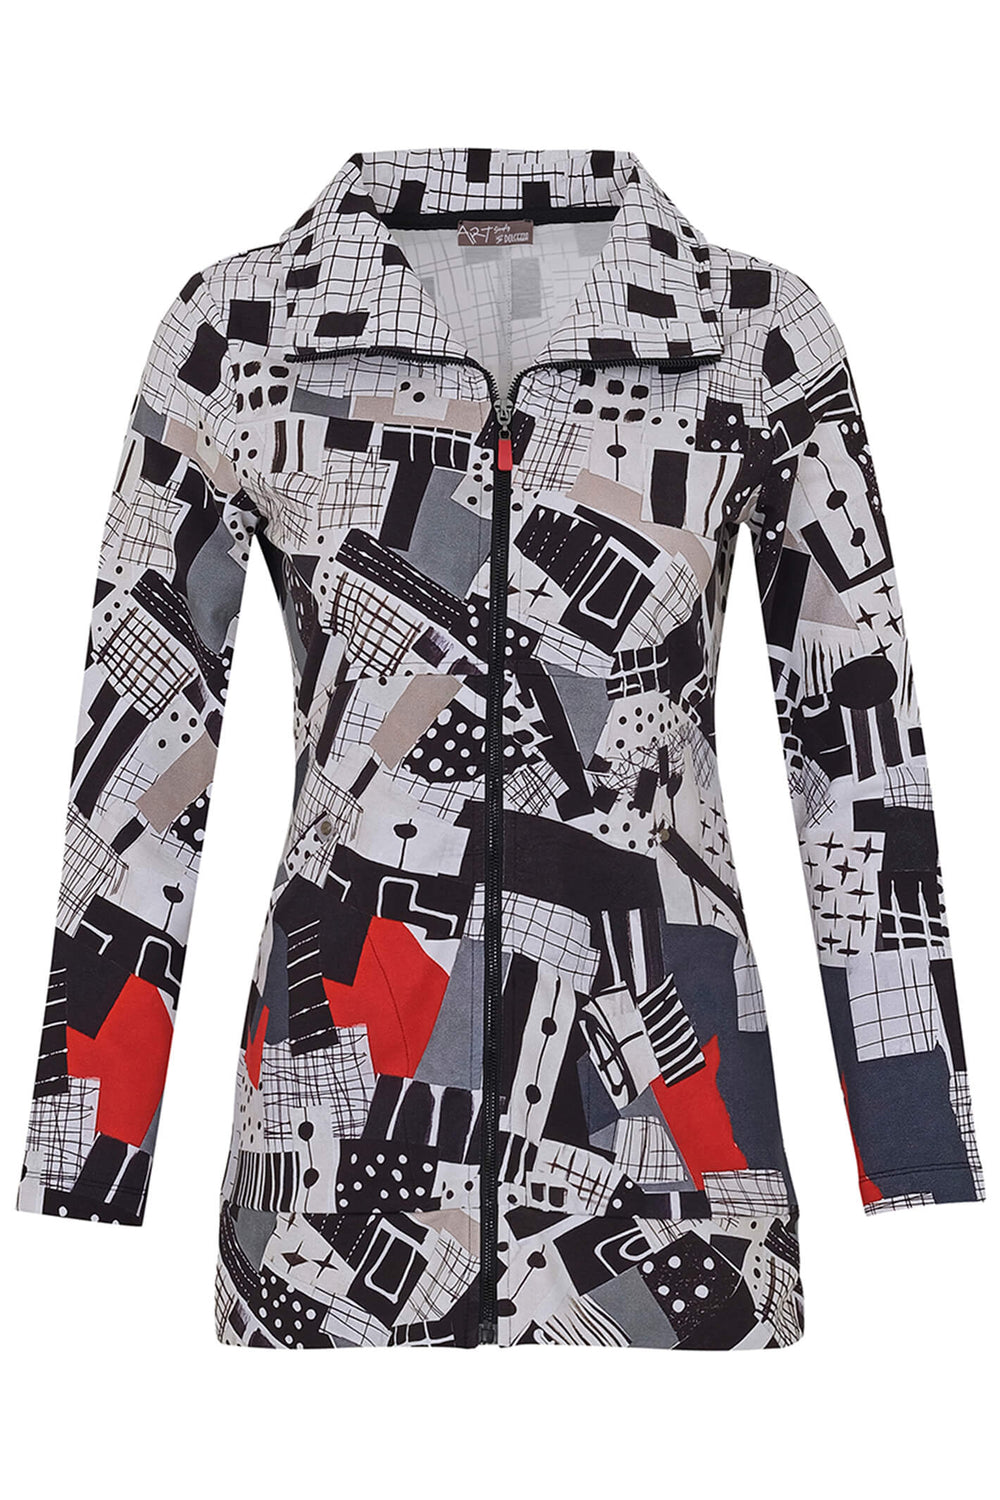 Dolcezza 73609 Black Tear Down The Wall Print Zip Front Jacket - Rouge Boutique